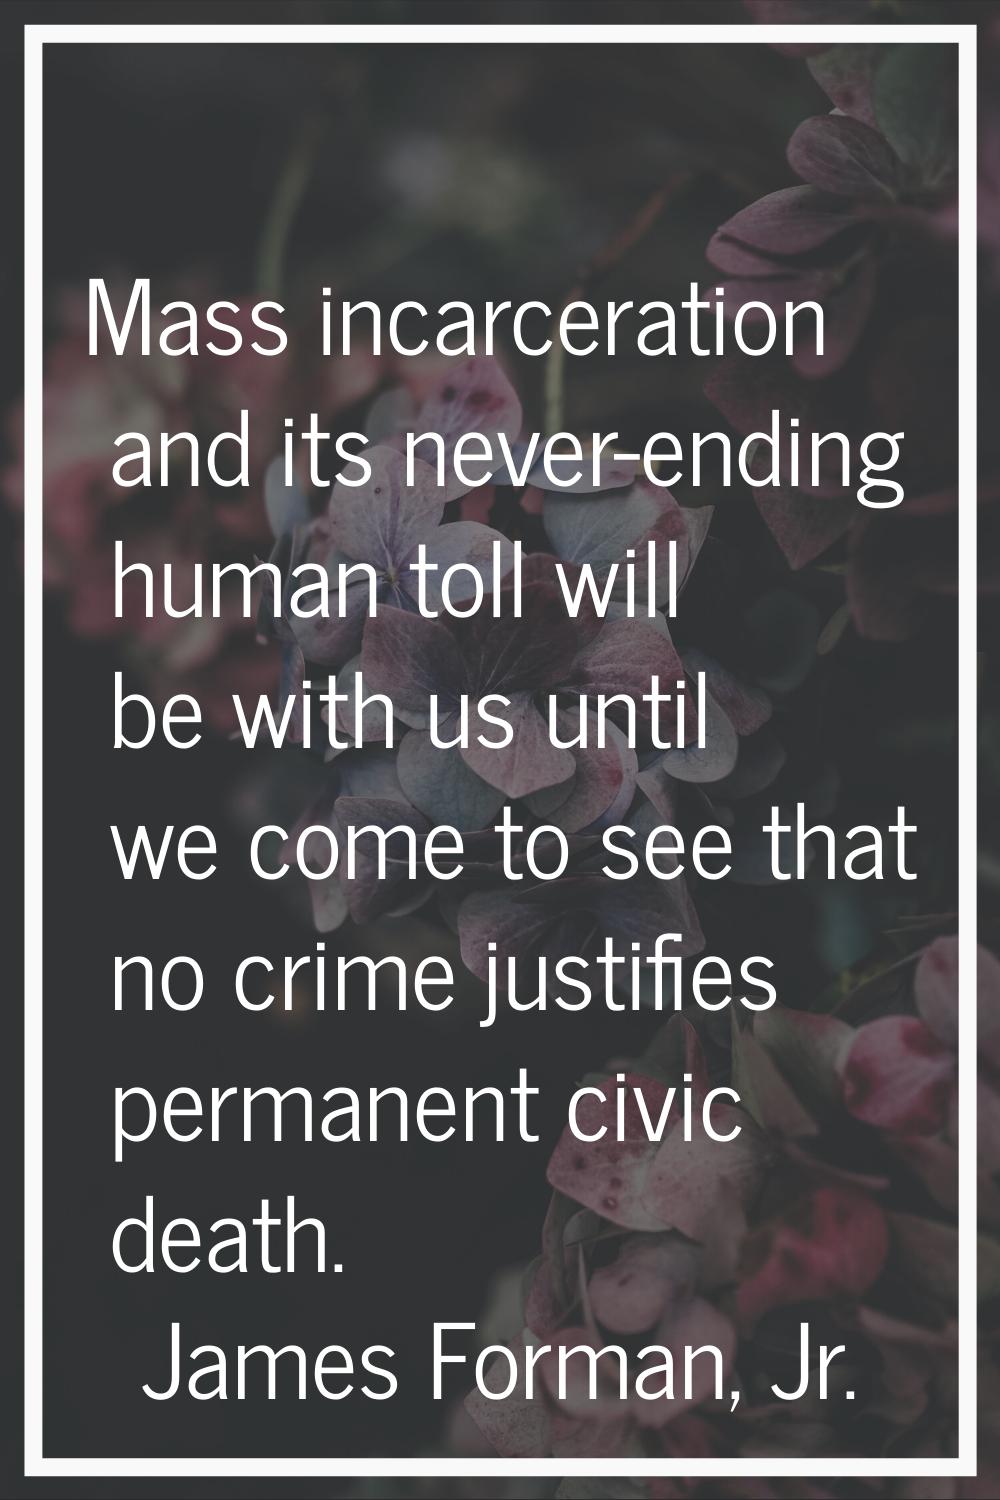 Mass incarceration and its never-ending human toll will be with us until we come to see that no cri